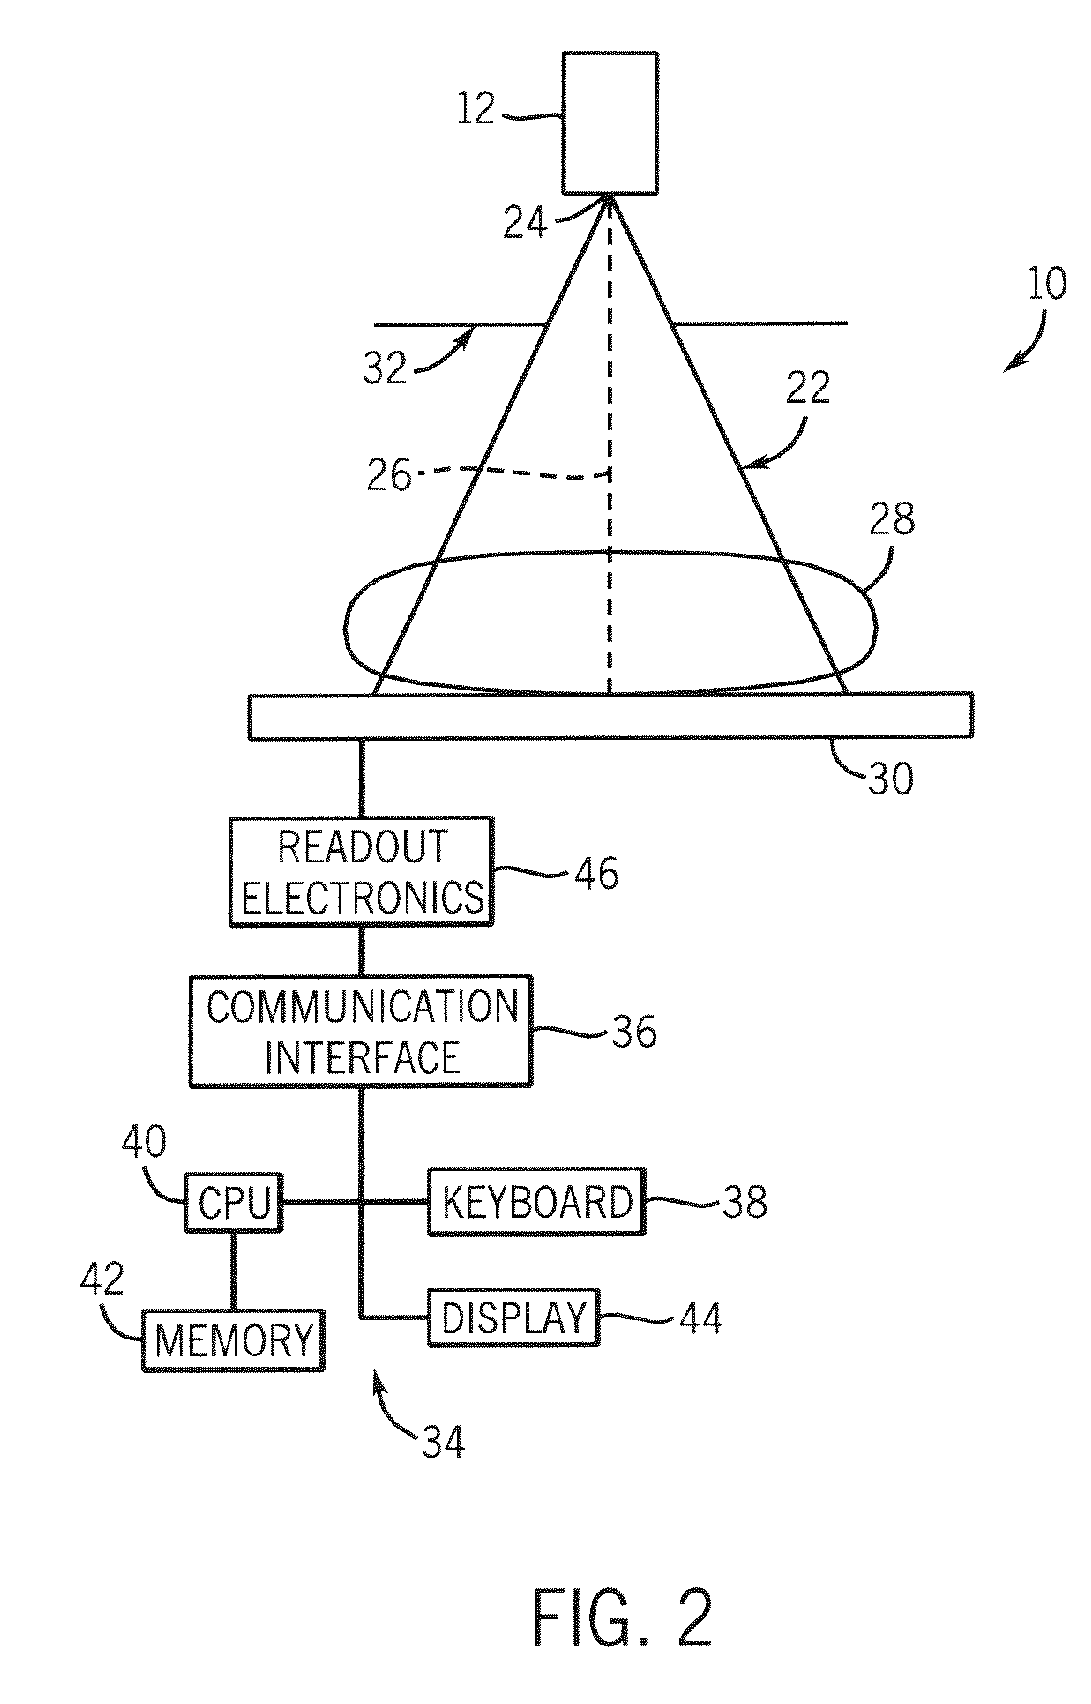 X-ray detector with impact absorbing cover